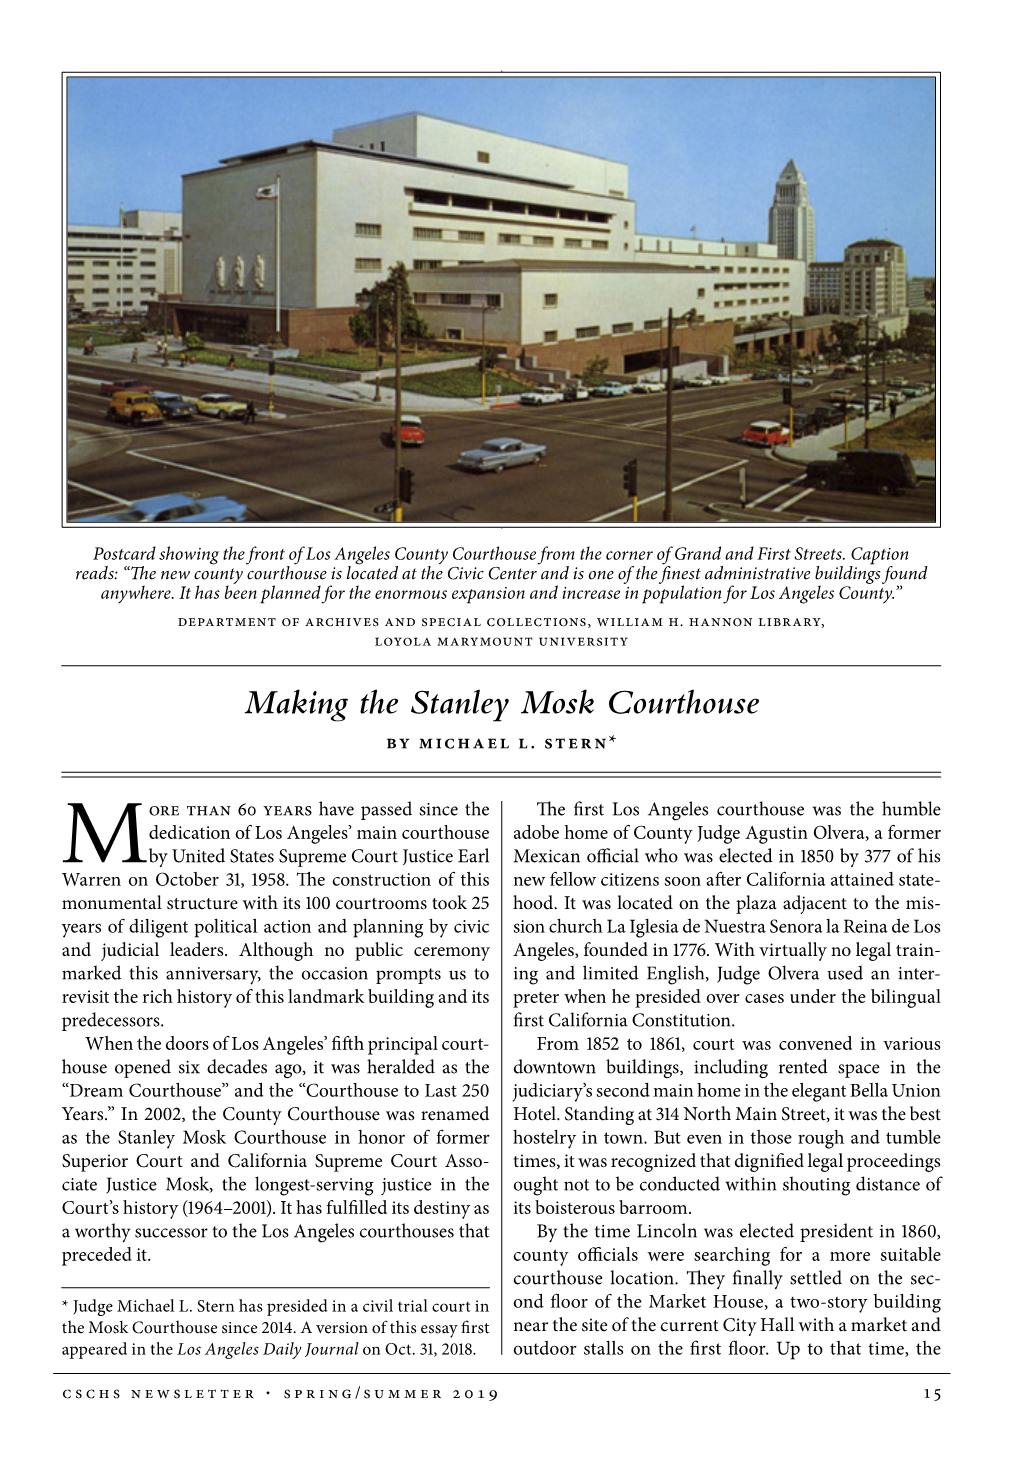 Making the Stanley Mosk Courthouse by Michael L